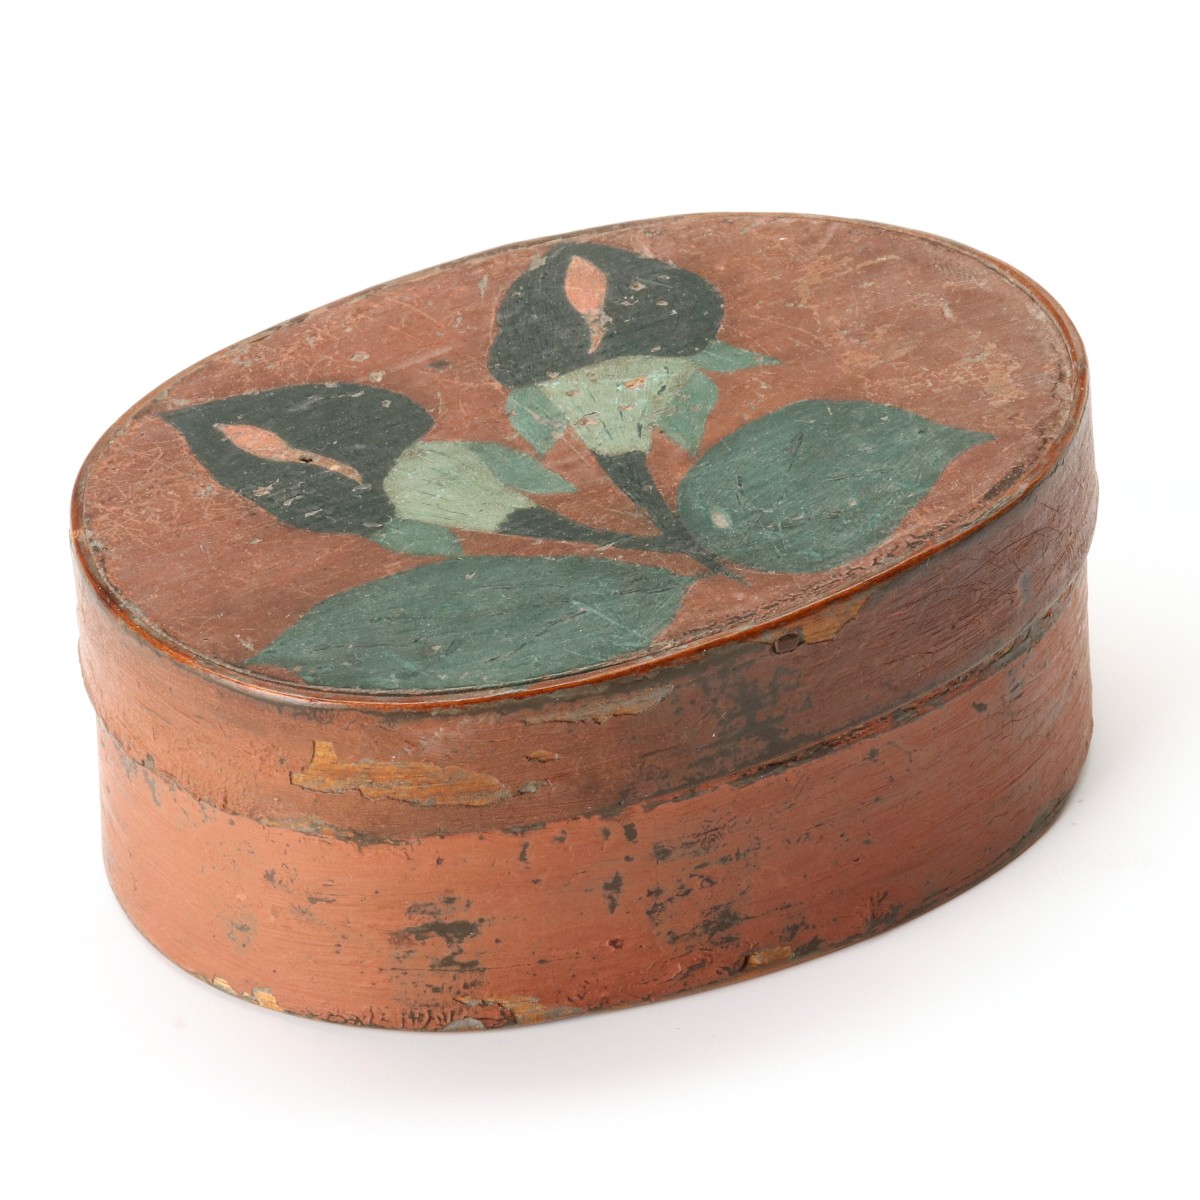 A DECORATED 19TH C. OVAL PANTRY BOX IN SALMON PAINT